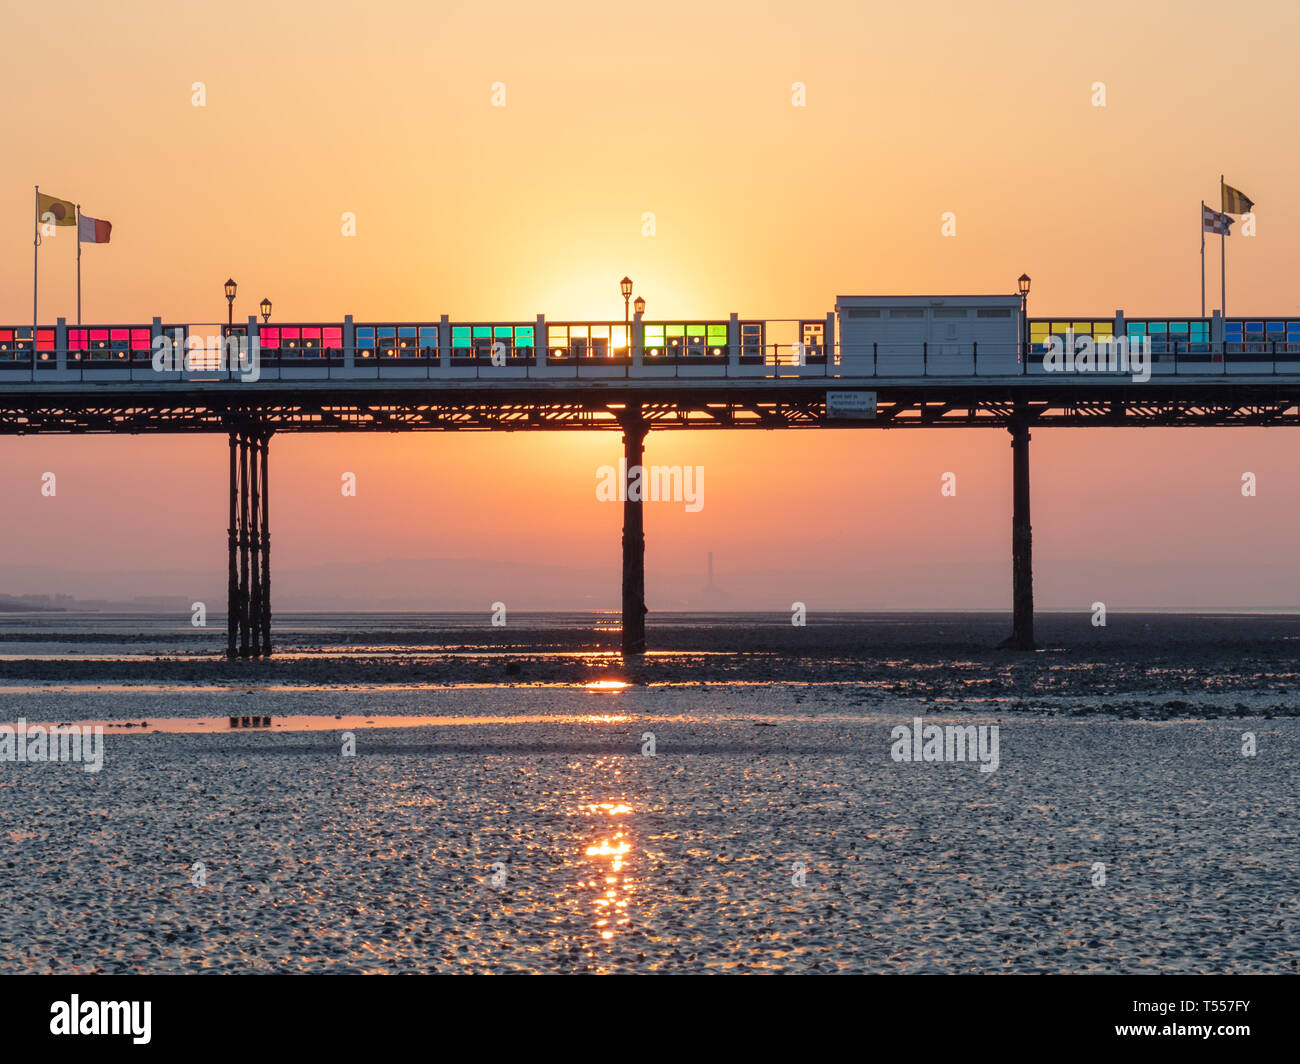 Worthing, Sussex, UK; 20th April 2019; Dawn With Sun Rising Behind Worthing Pier at Low Tide Stock Photo